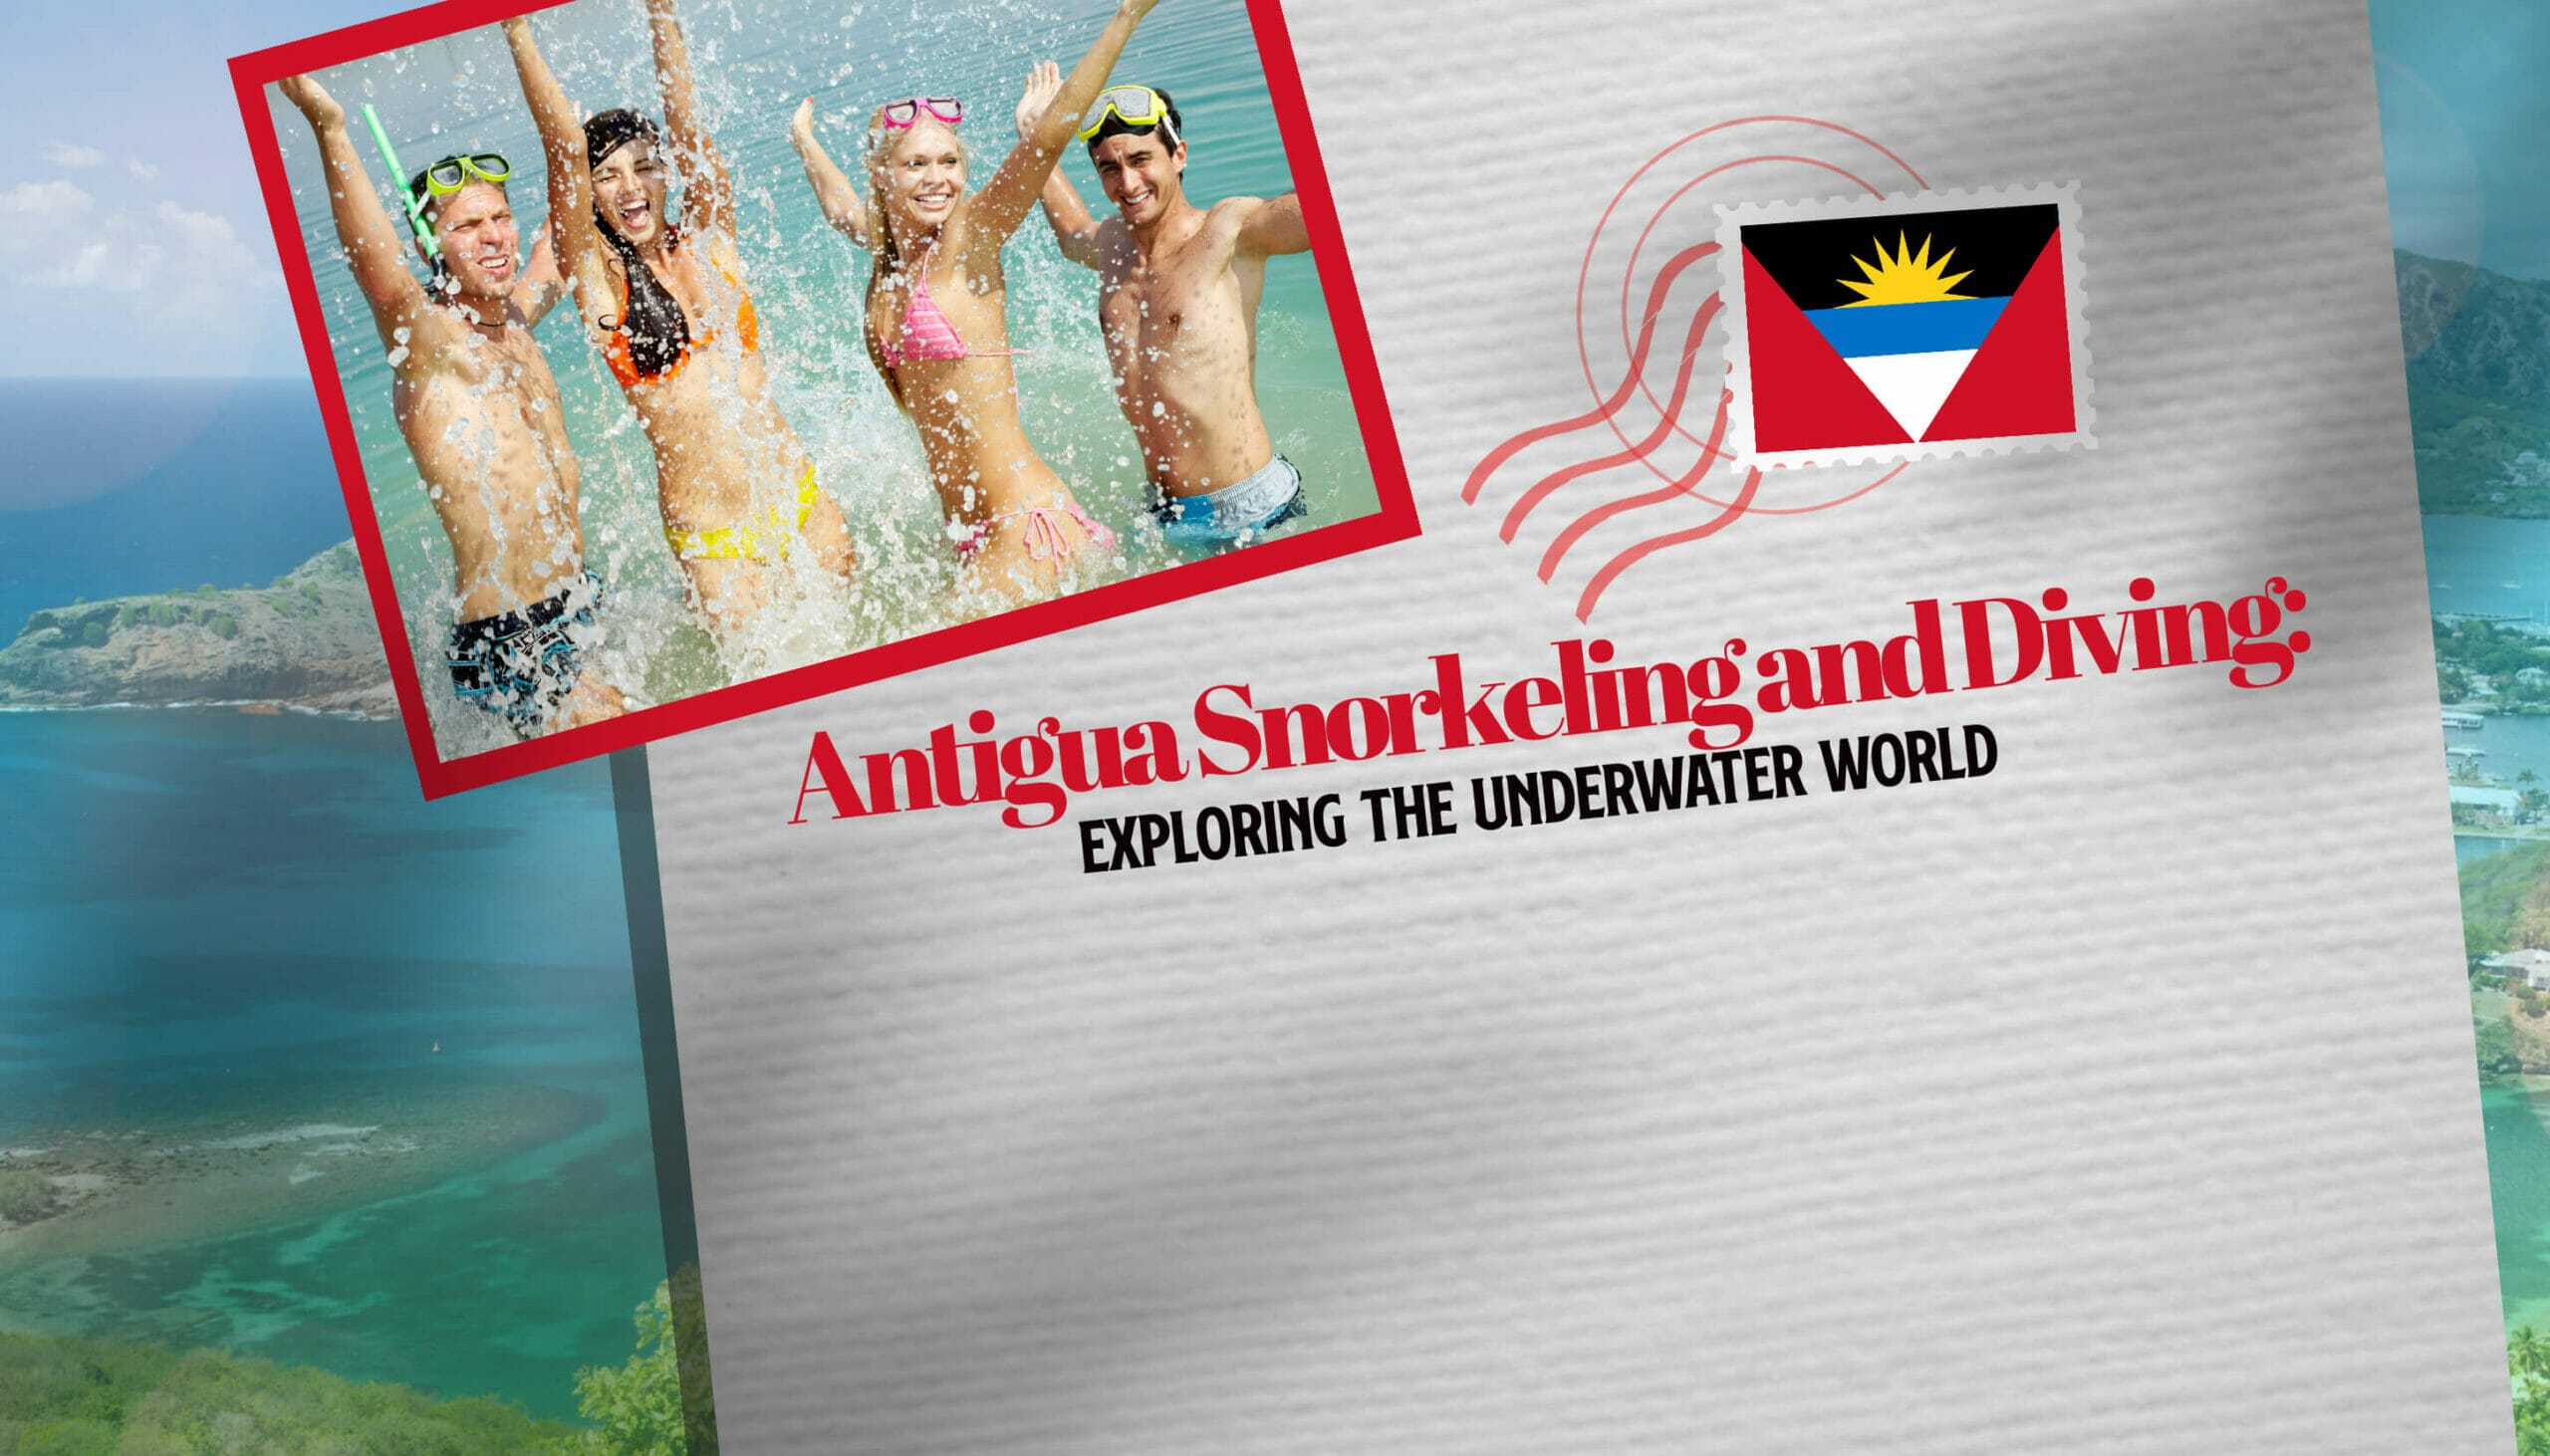 Antigua Snorkeling and Diving Exploring the Underwater World